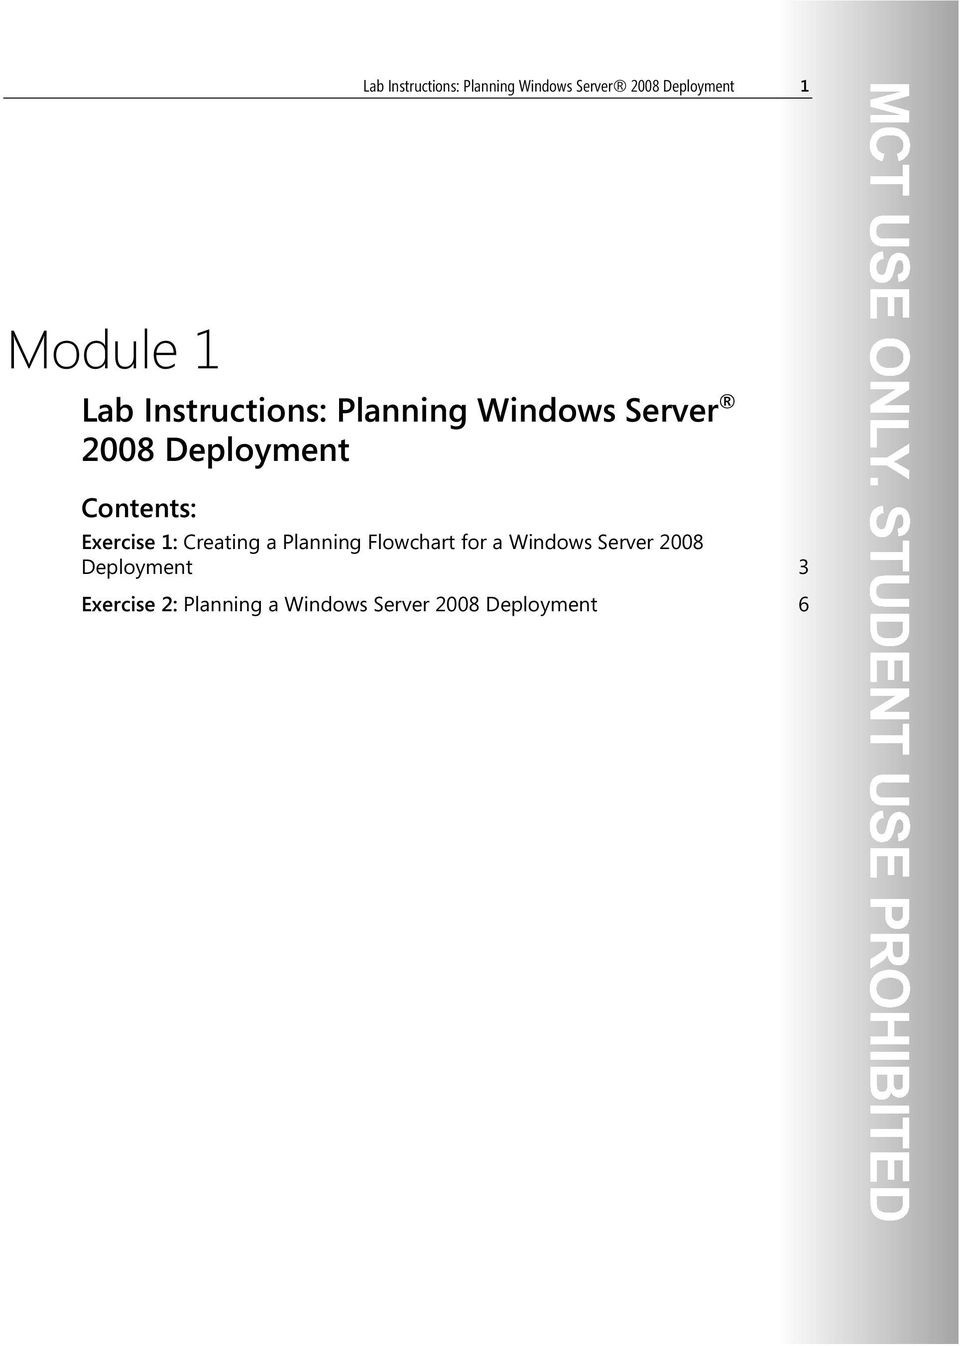 Exercise 1: Creating a Planning Flowchart for a Windows Server 2008